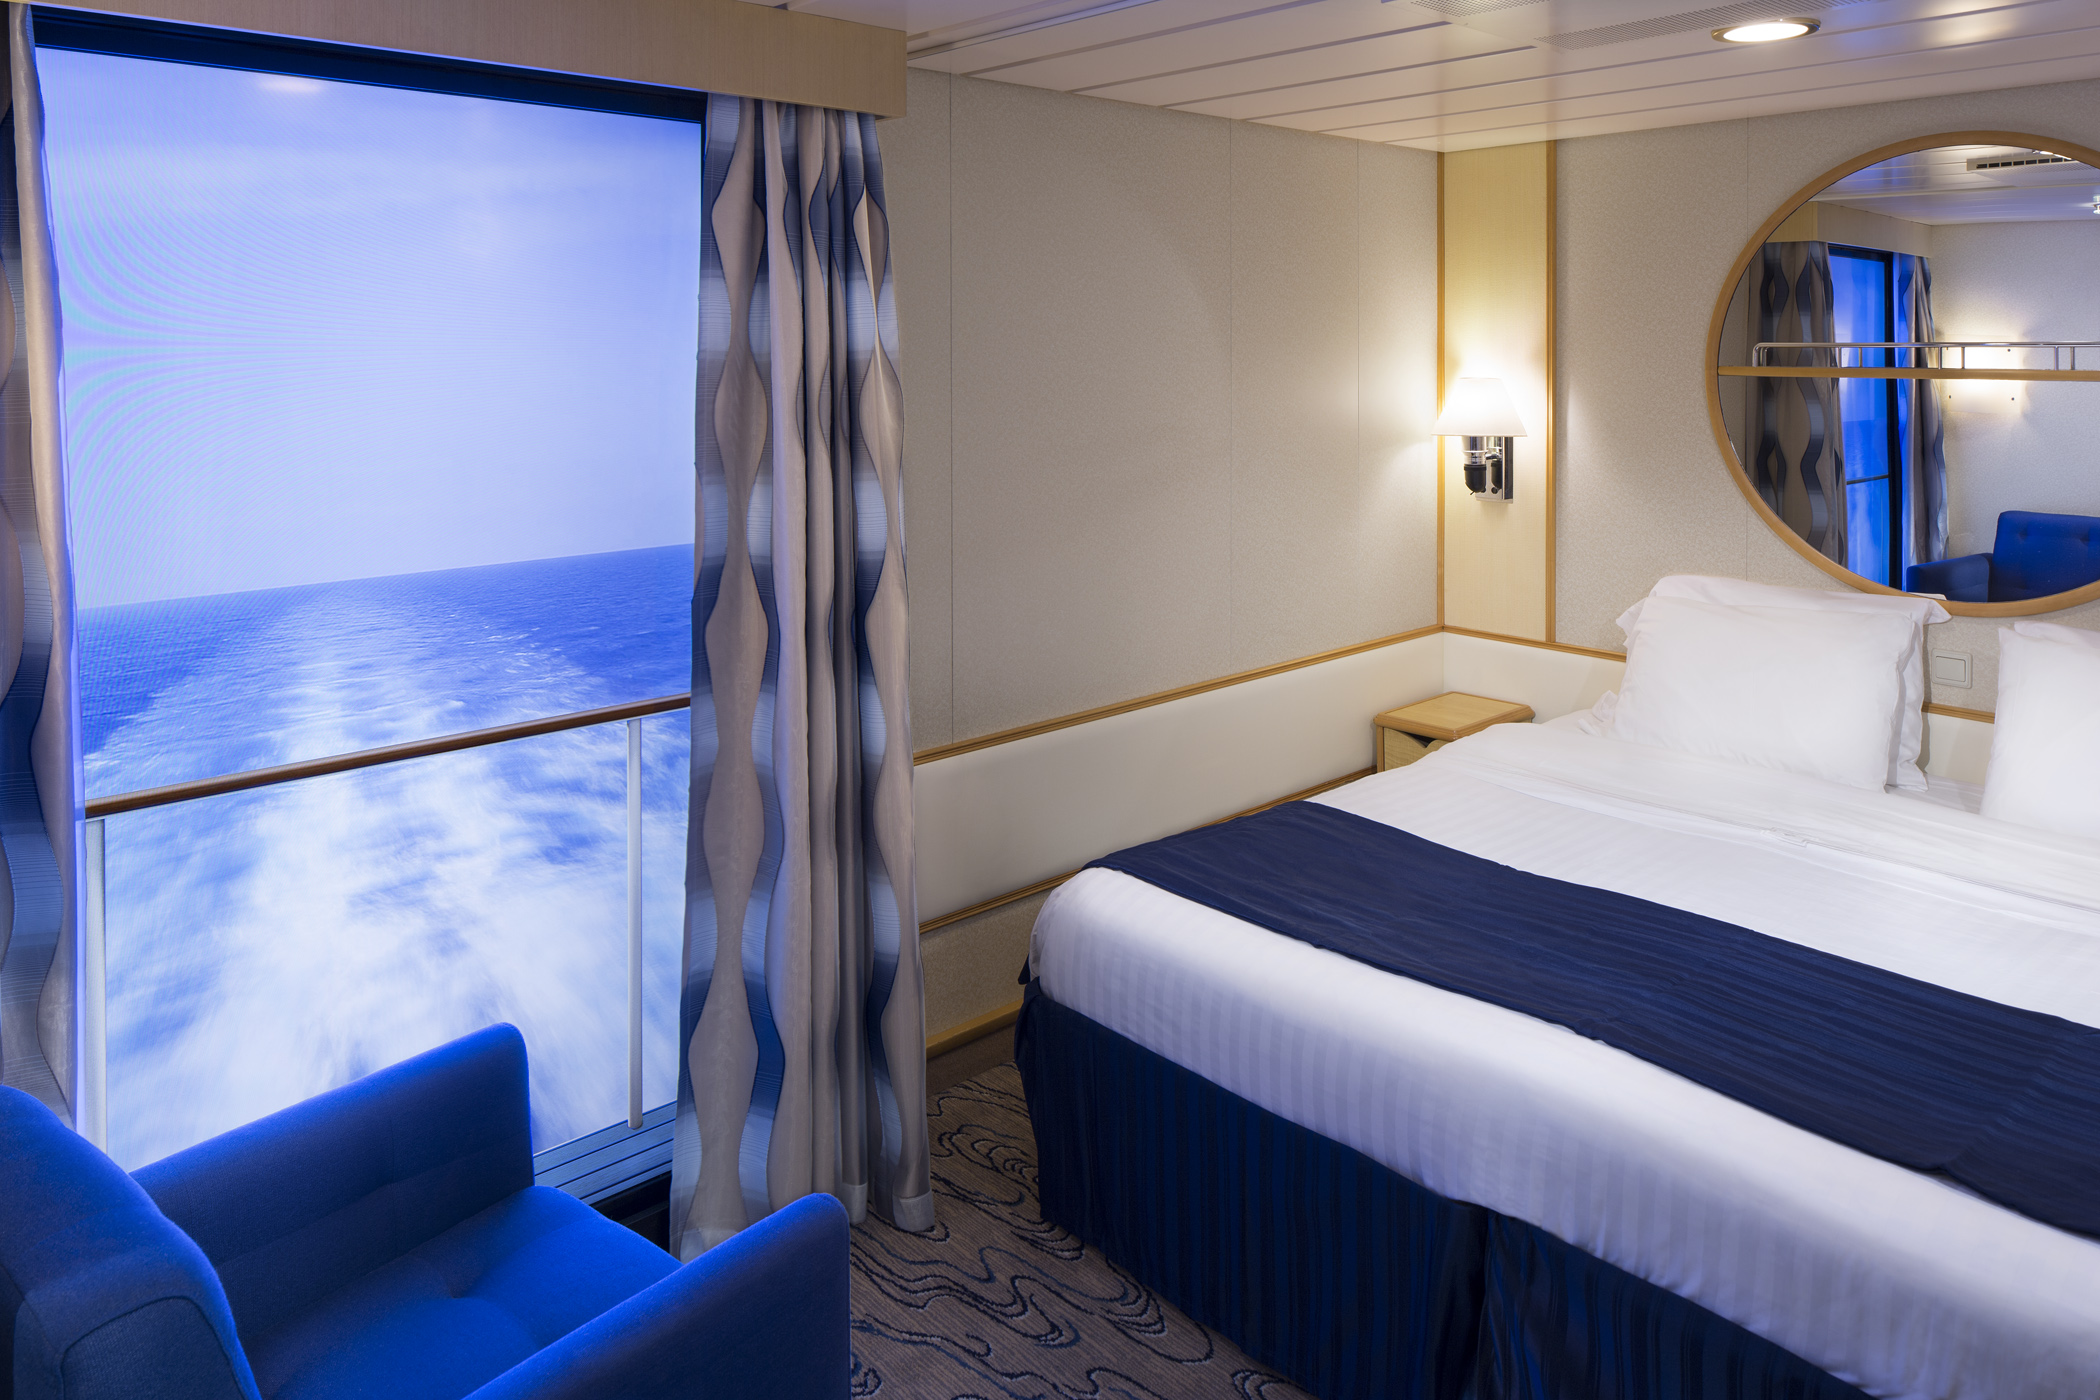 Image of Inside Cabin with Virtual Balcony, sourced from: Royal Caribbean International https://touristwire.com/wp-content/uploads/2023/05/Virtual_Balcony_Image.jpg